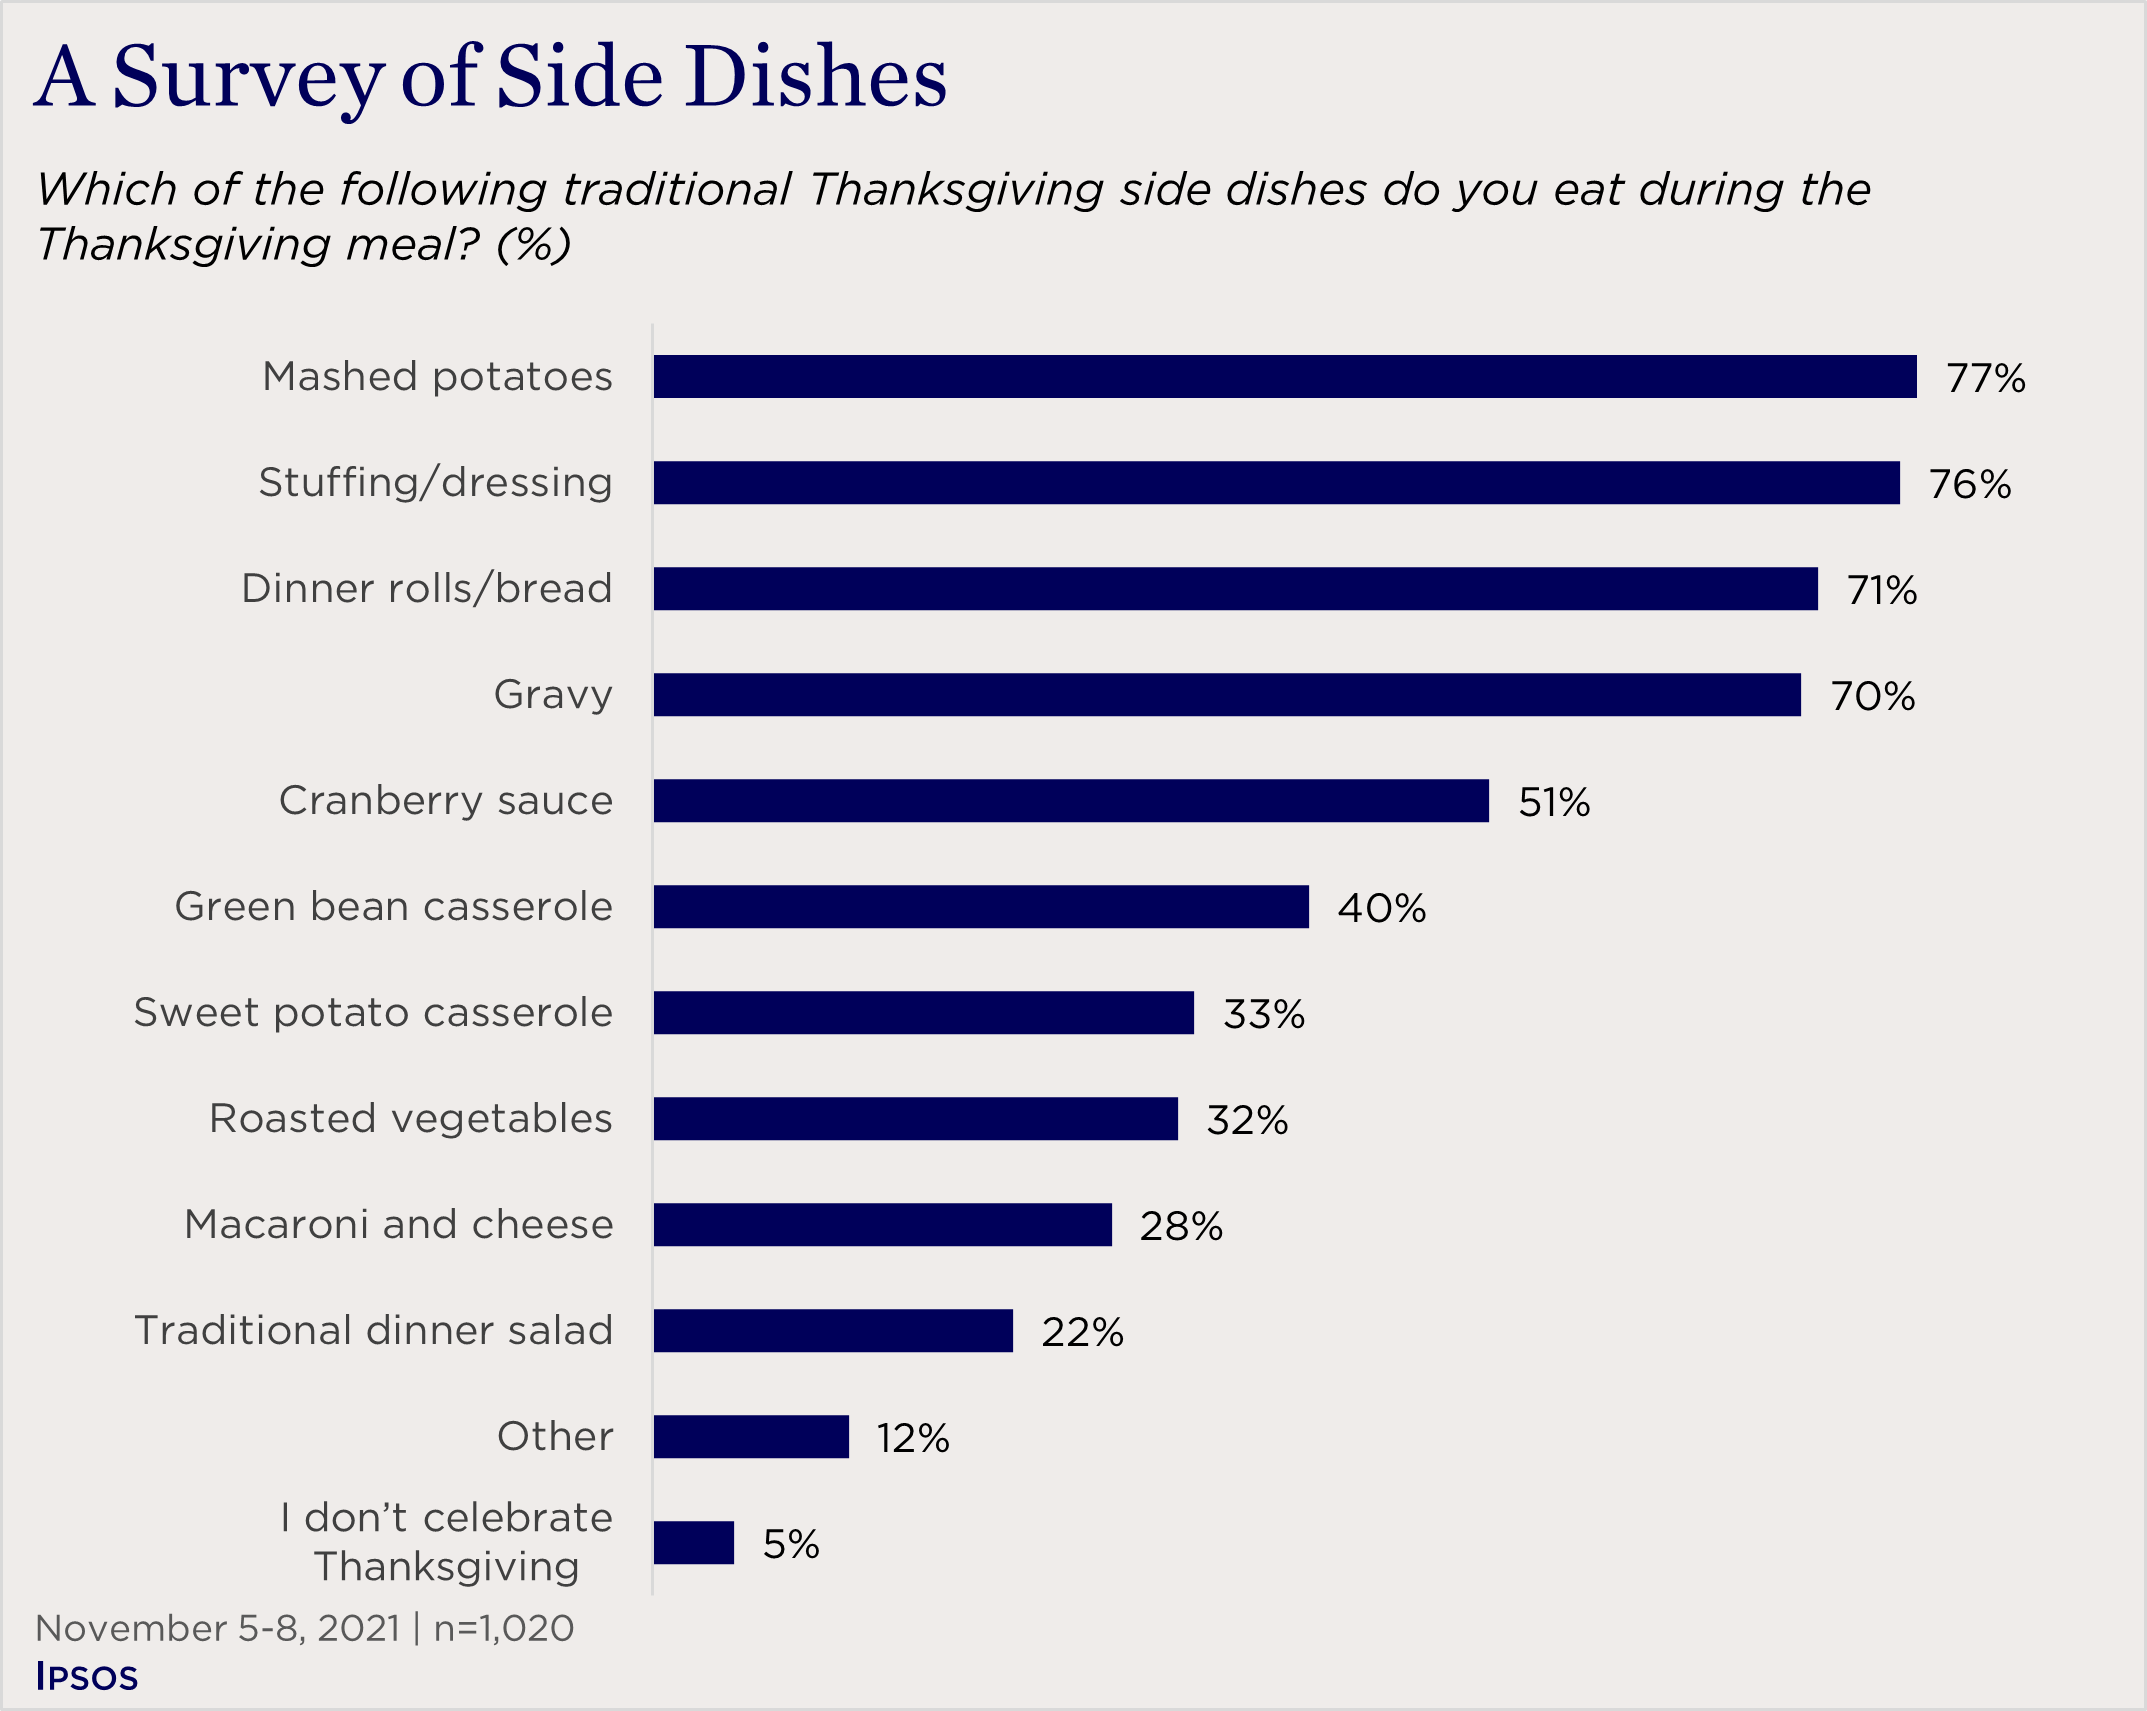 "bar chart showing prevalence of Thanksgiving side dishes"